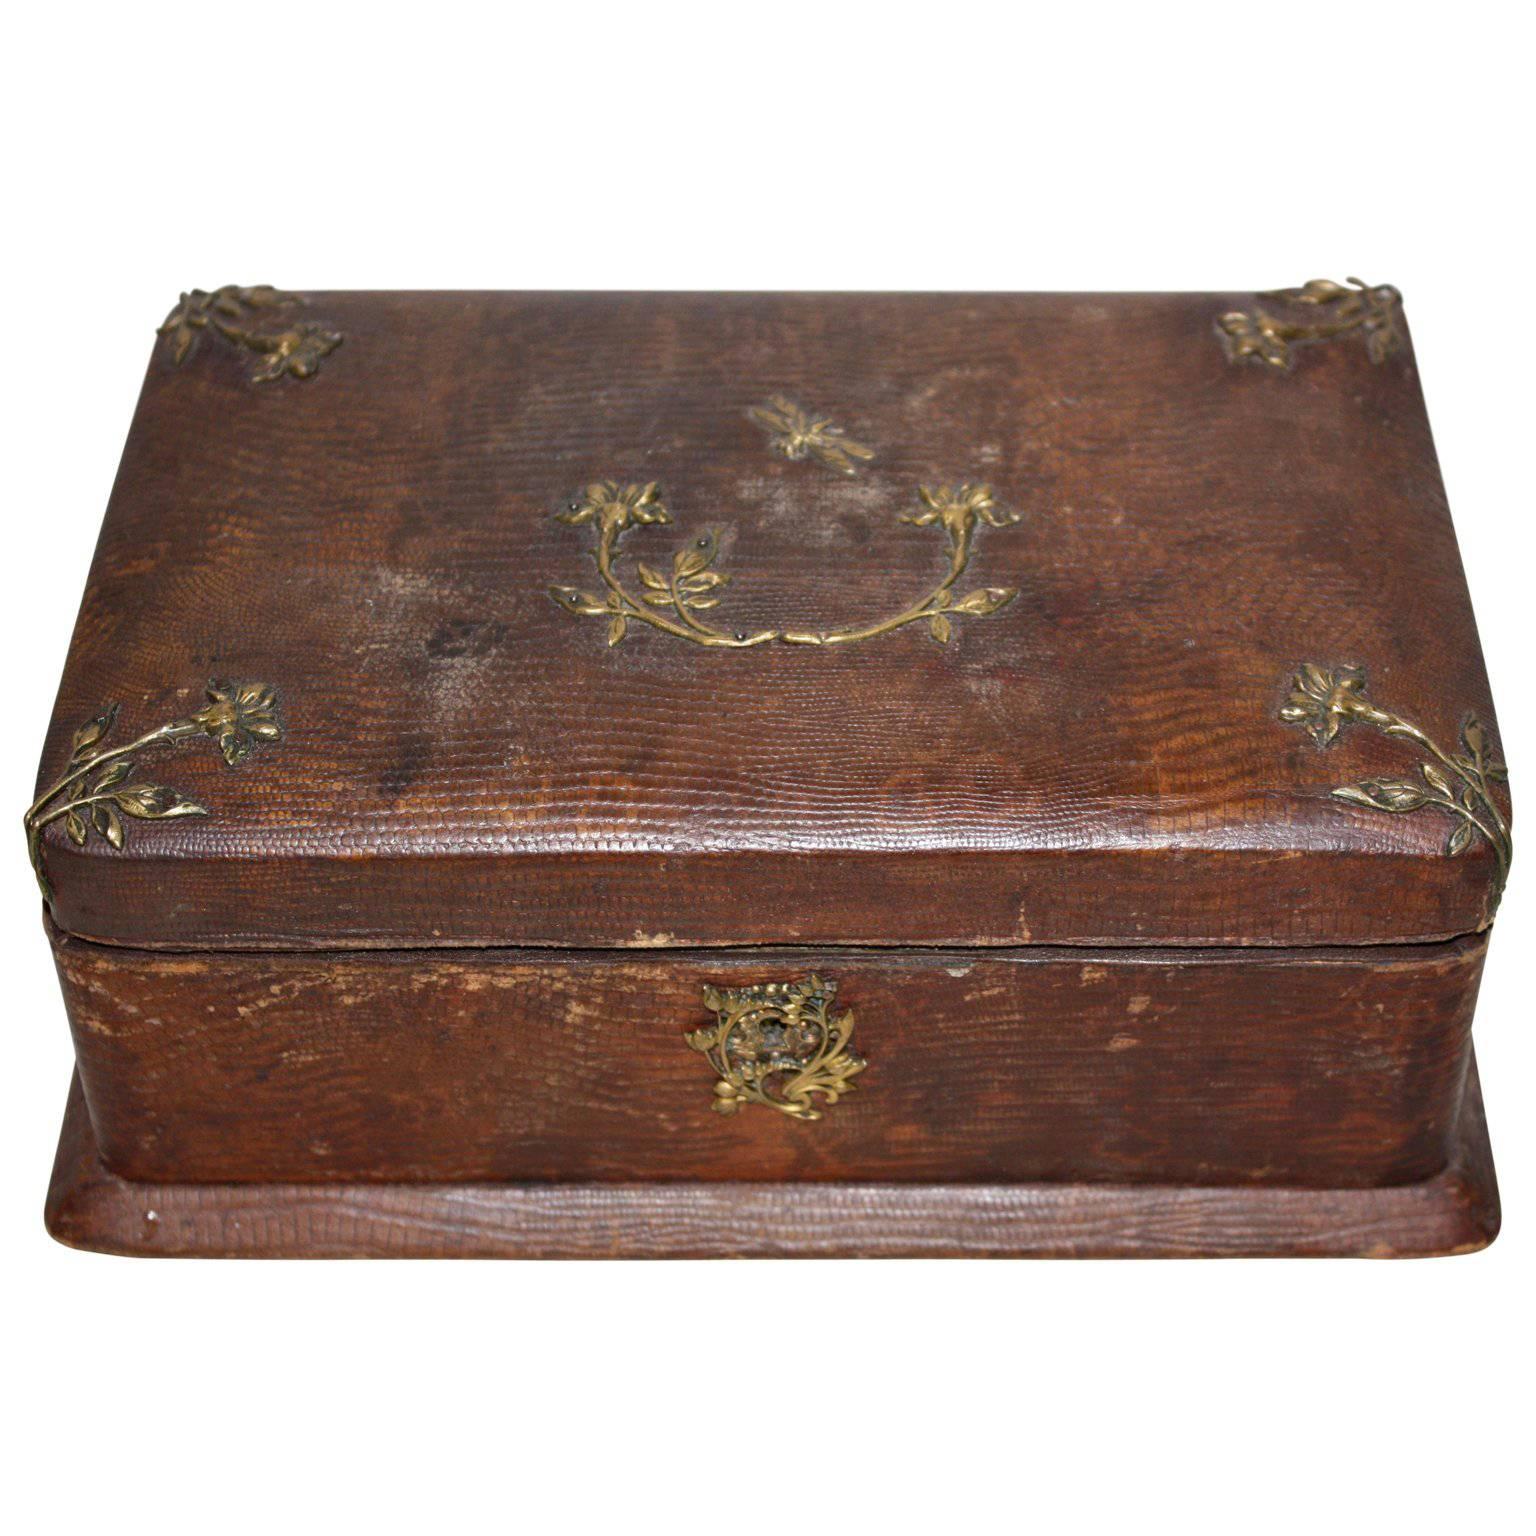 Early 20th Century Leather Jewellery Box